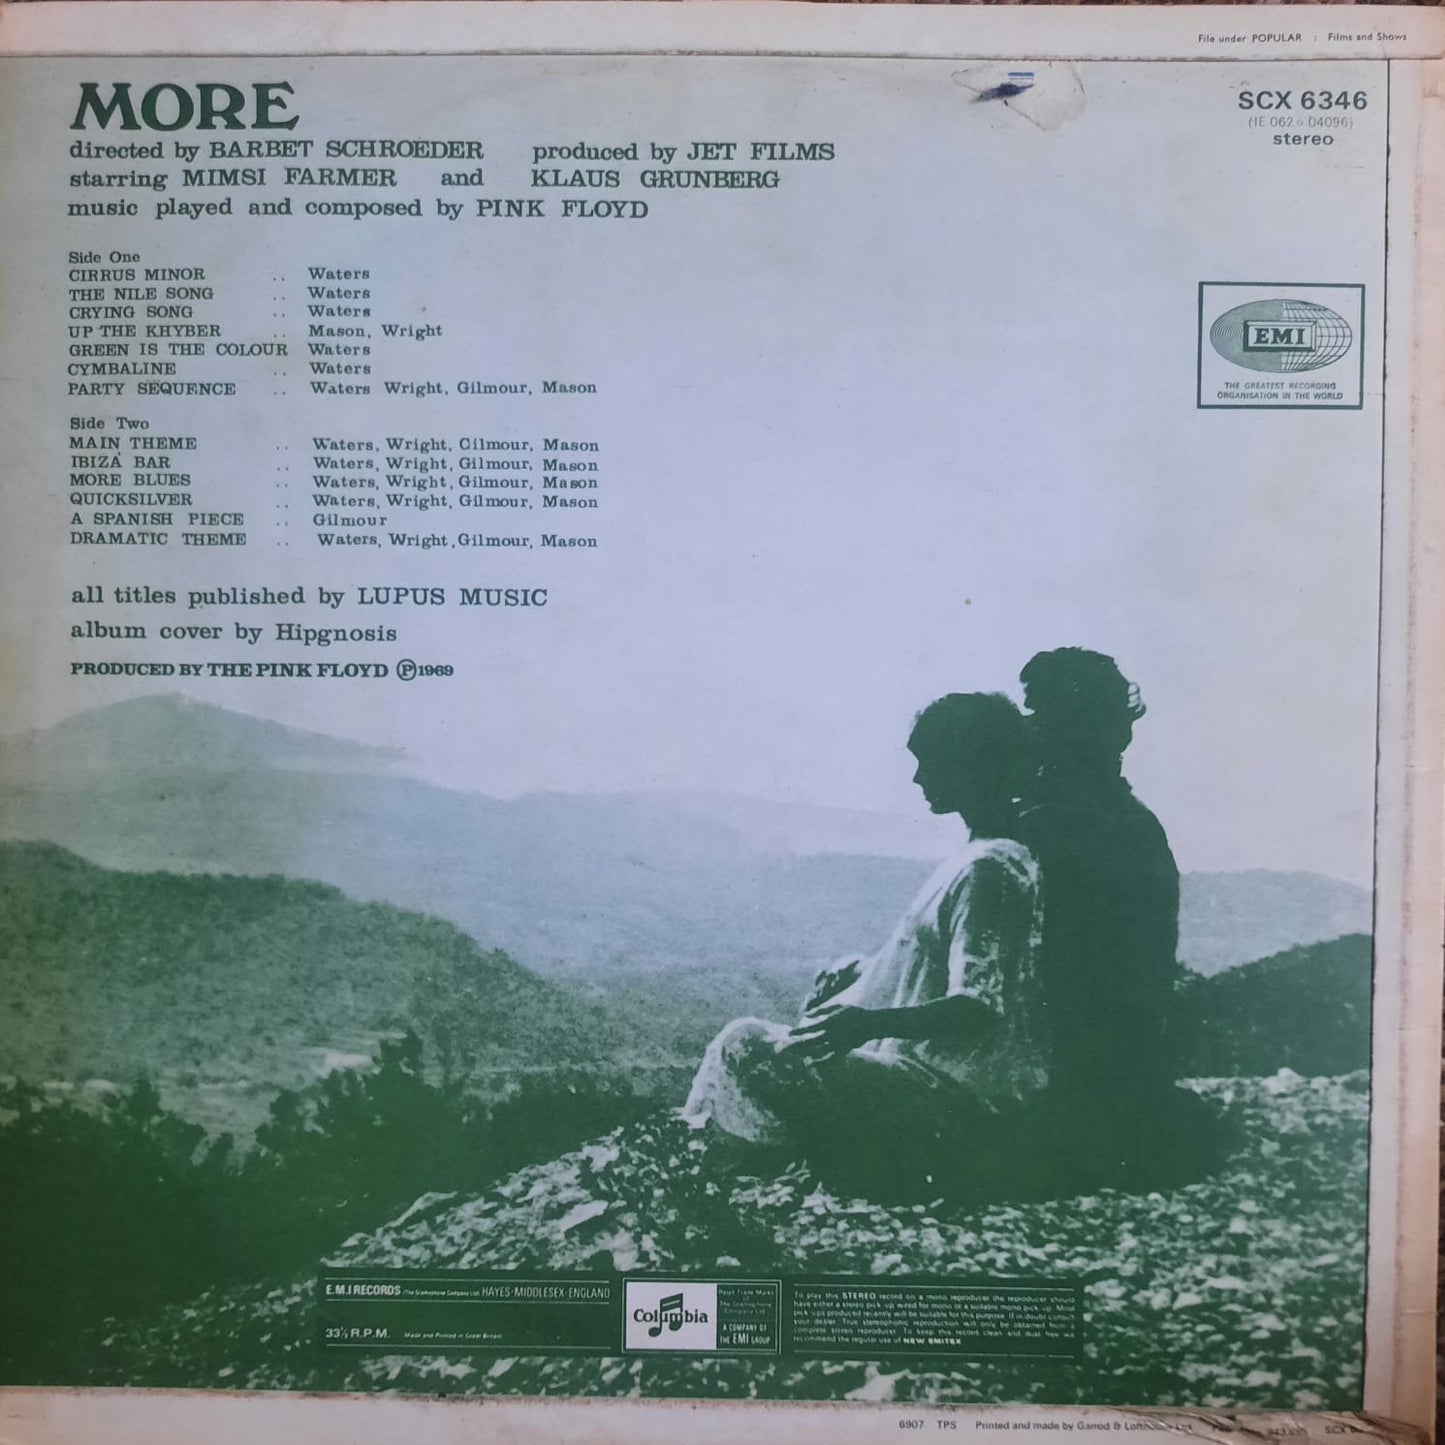 Pink Floyd - Soundtrack From The Film ″More″ (LP, Países Bajos, 1969)